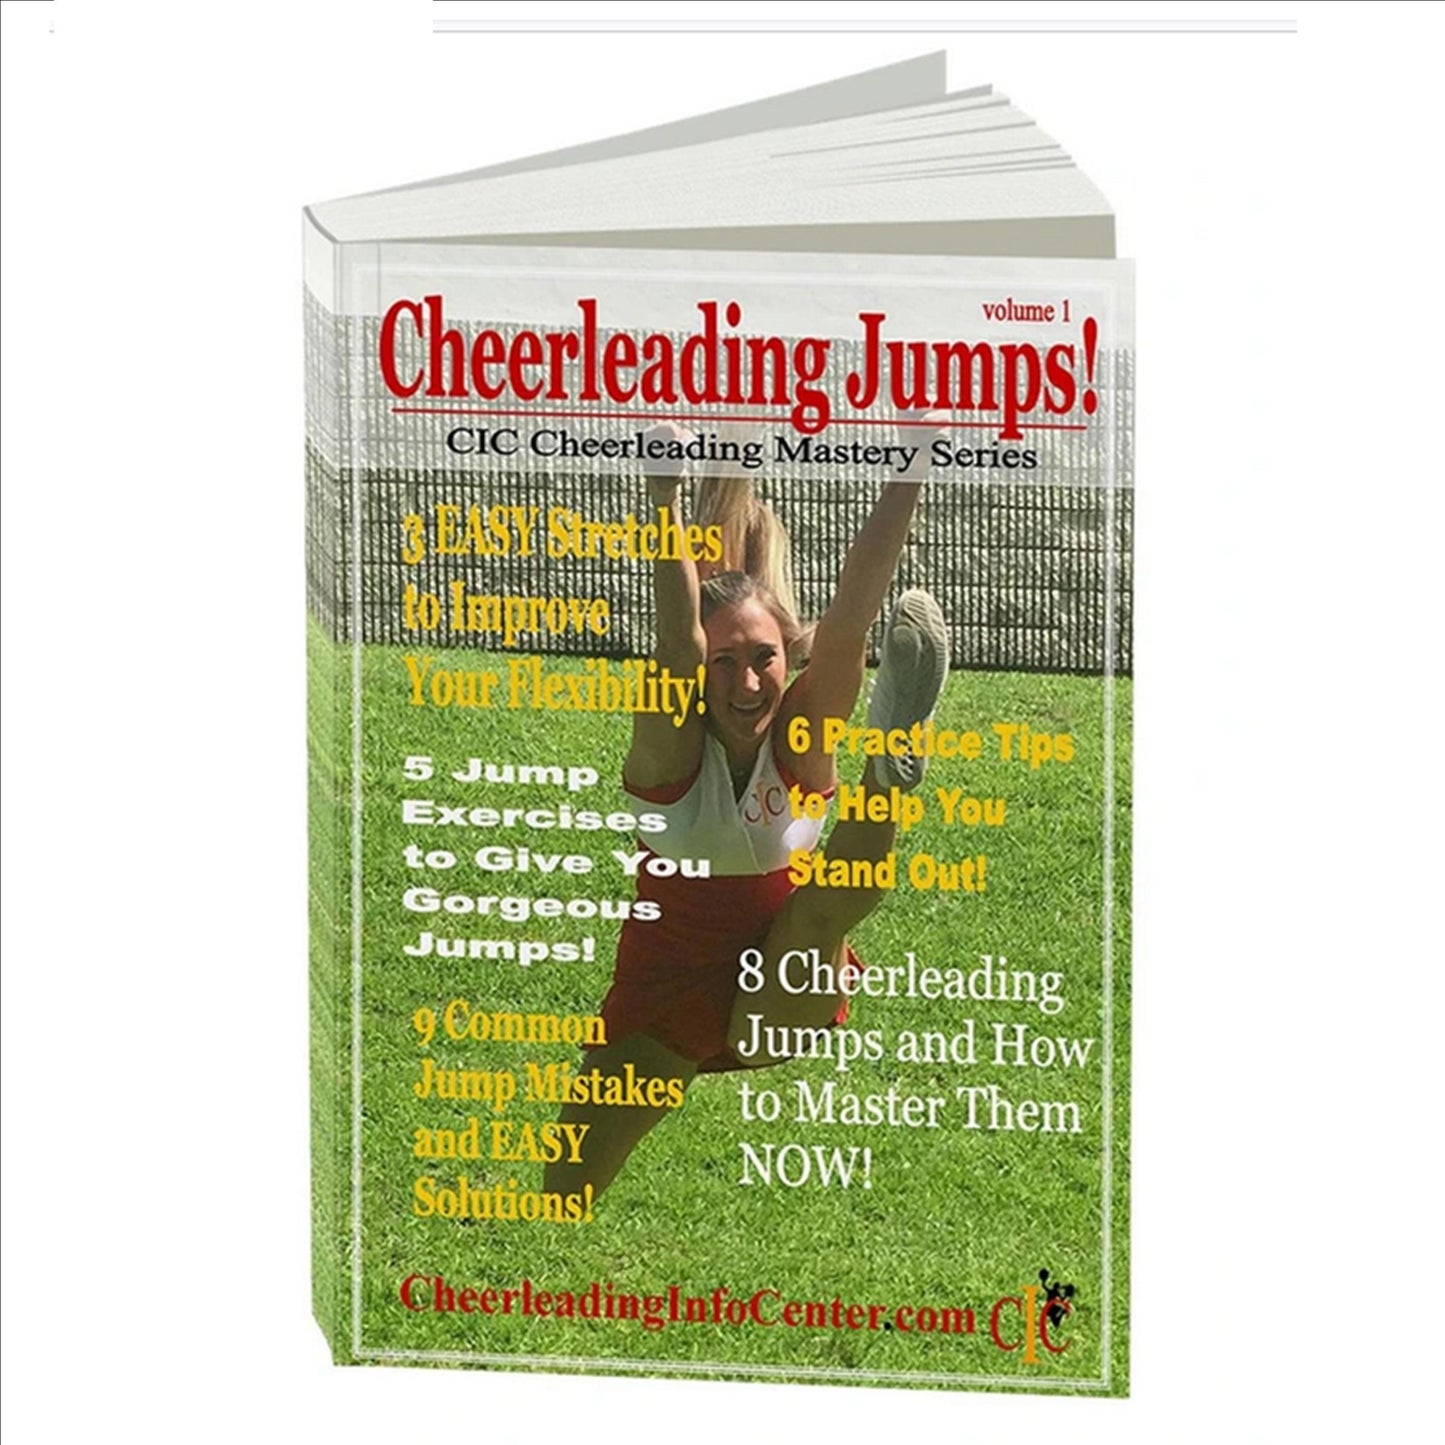 Cheerleading Jumps and Exercises Complete Program - Video Classes - Cheer and Dance On Demand